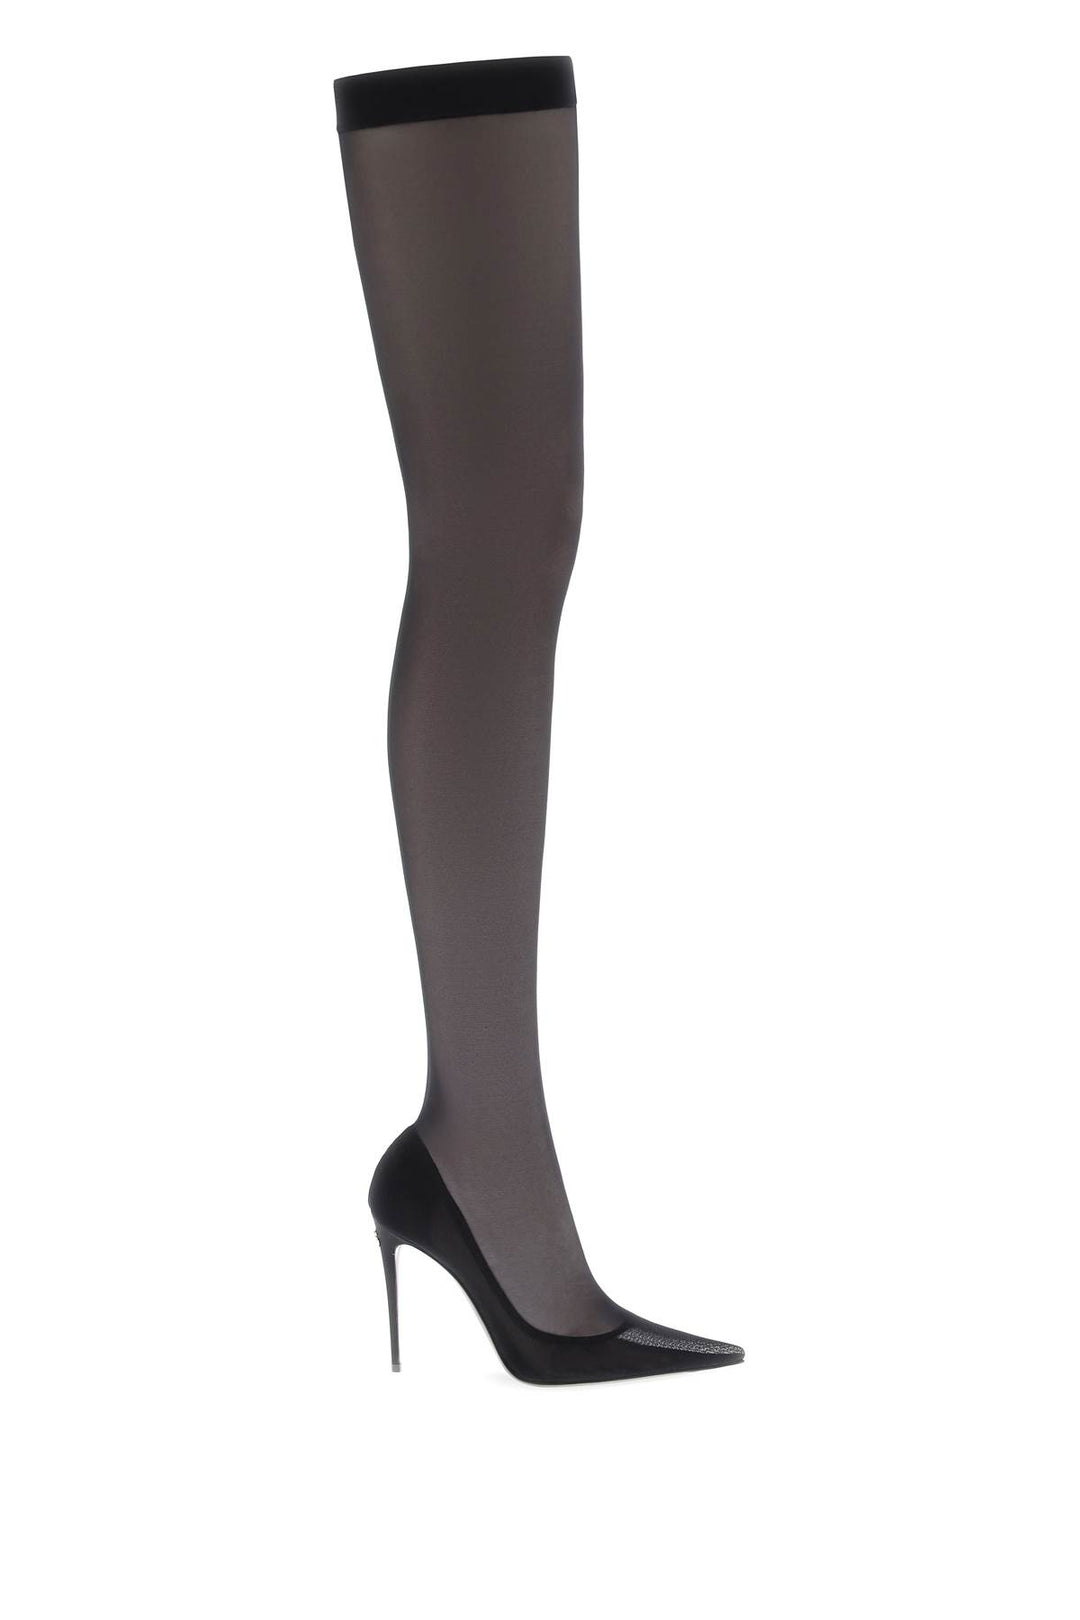 Dolce & Gabbana Stretch Tulle Thigh High Boots   Nero